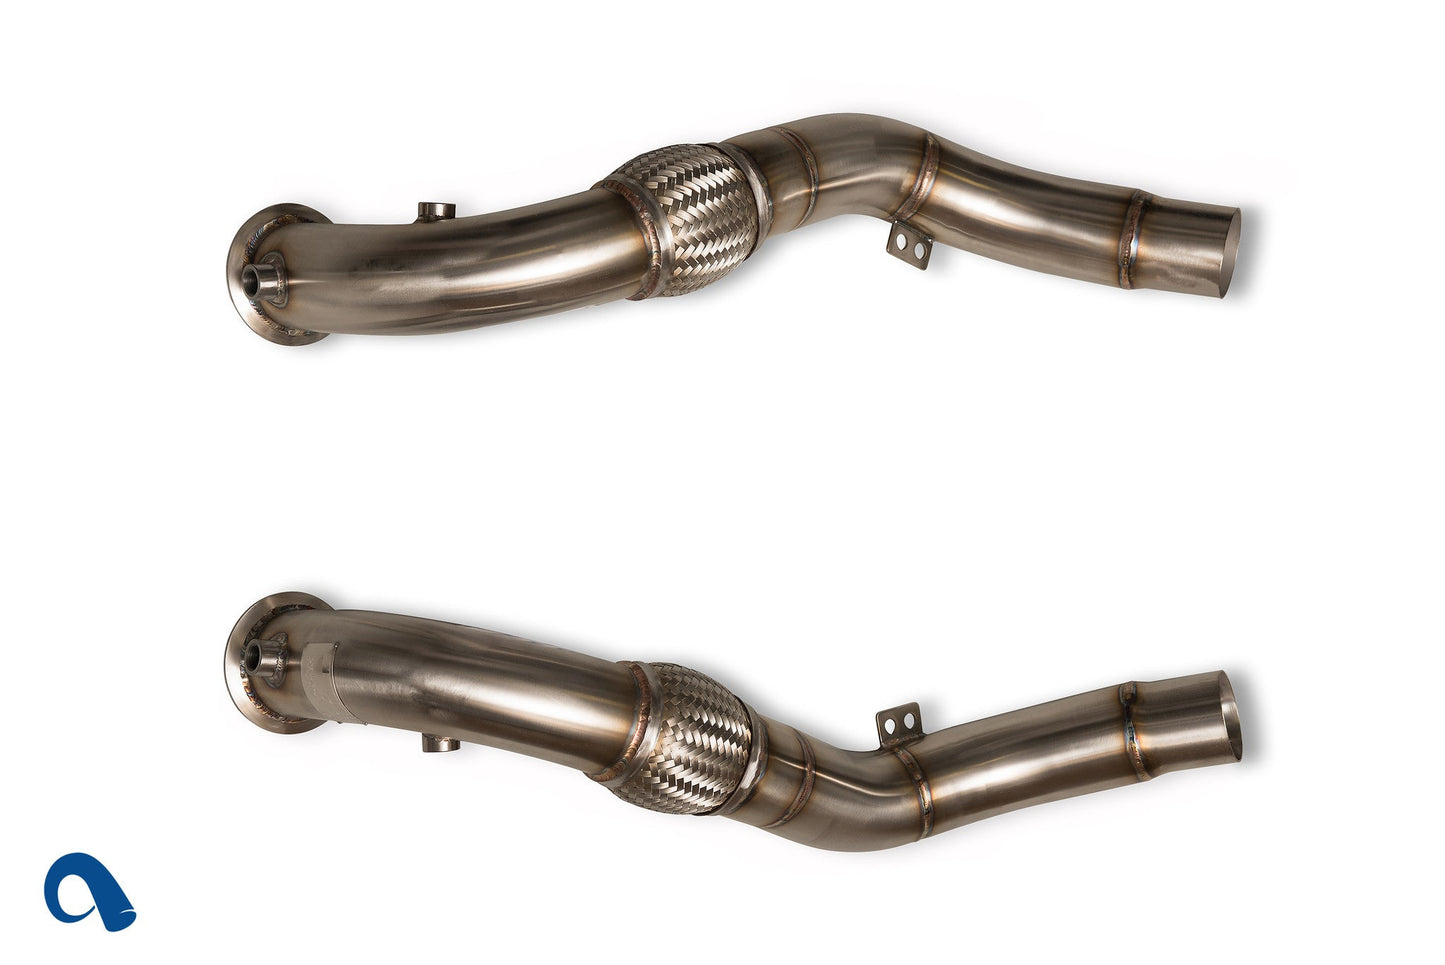 Active Autowerke BMW N63 Downpipes for | Twin-turbo V8 BMW X5 and X6 | F10 550i by BMW tuner, Active Autowerke